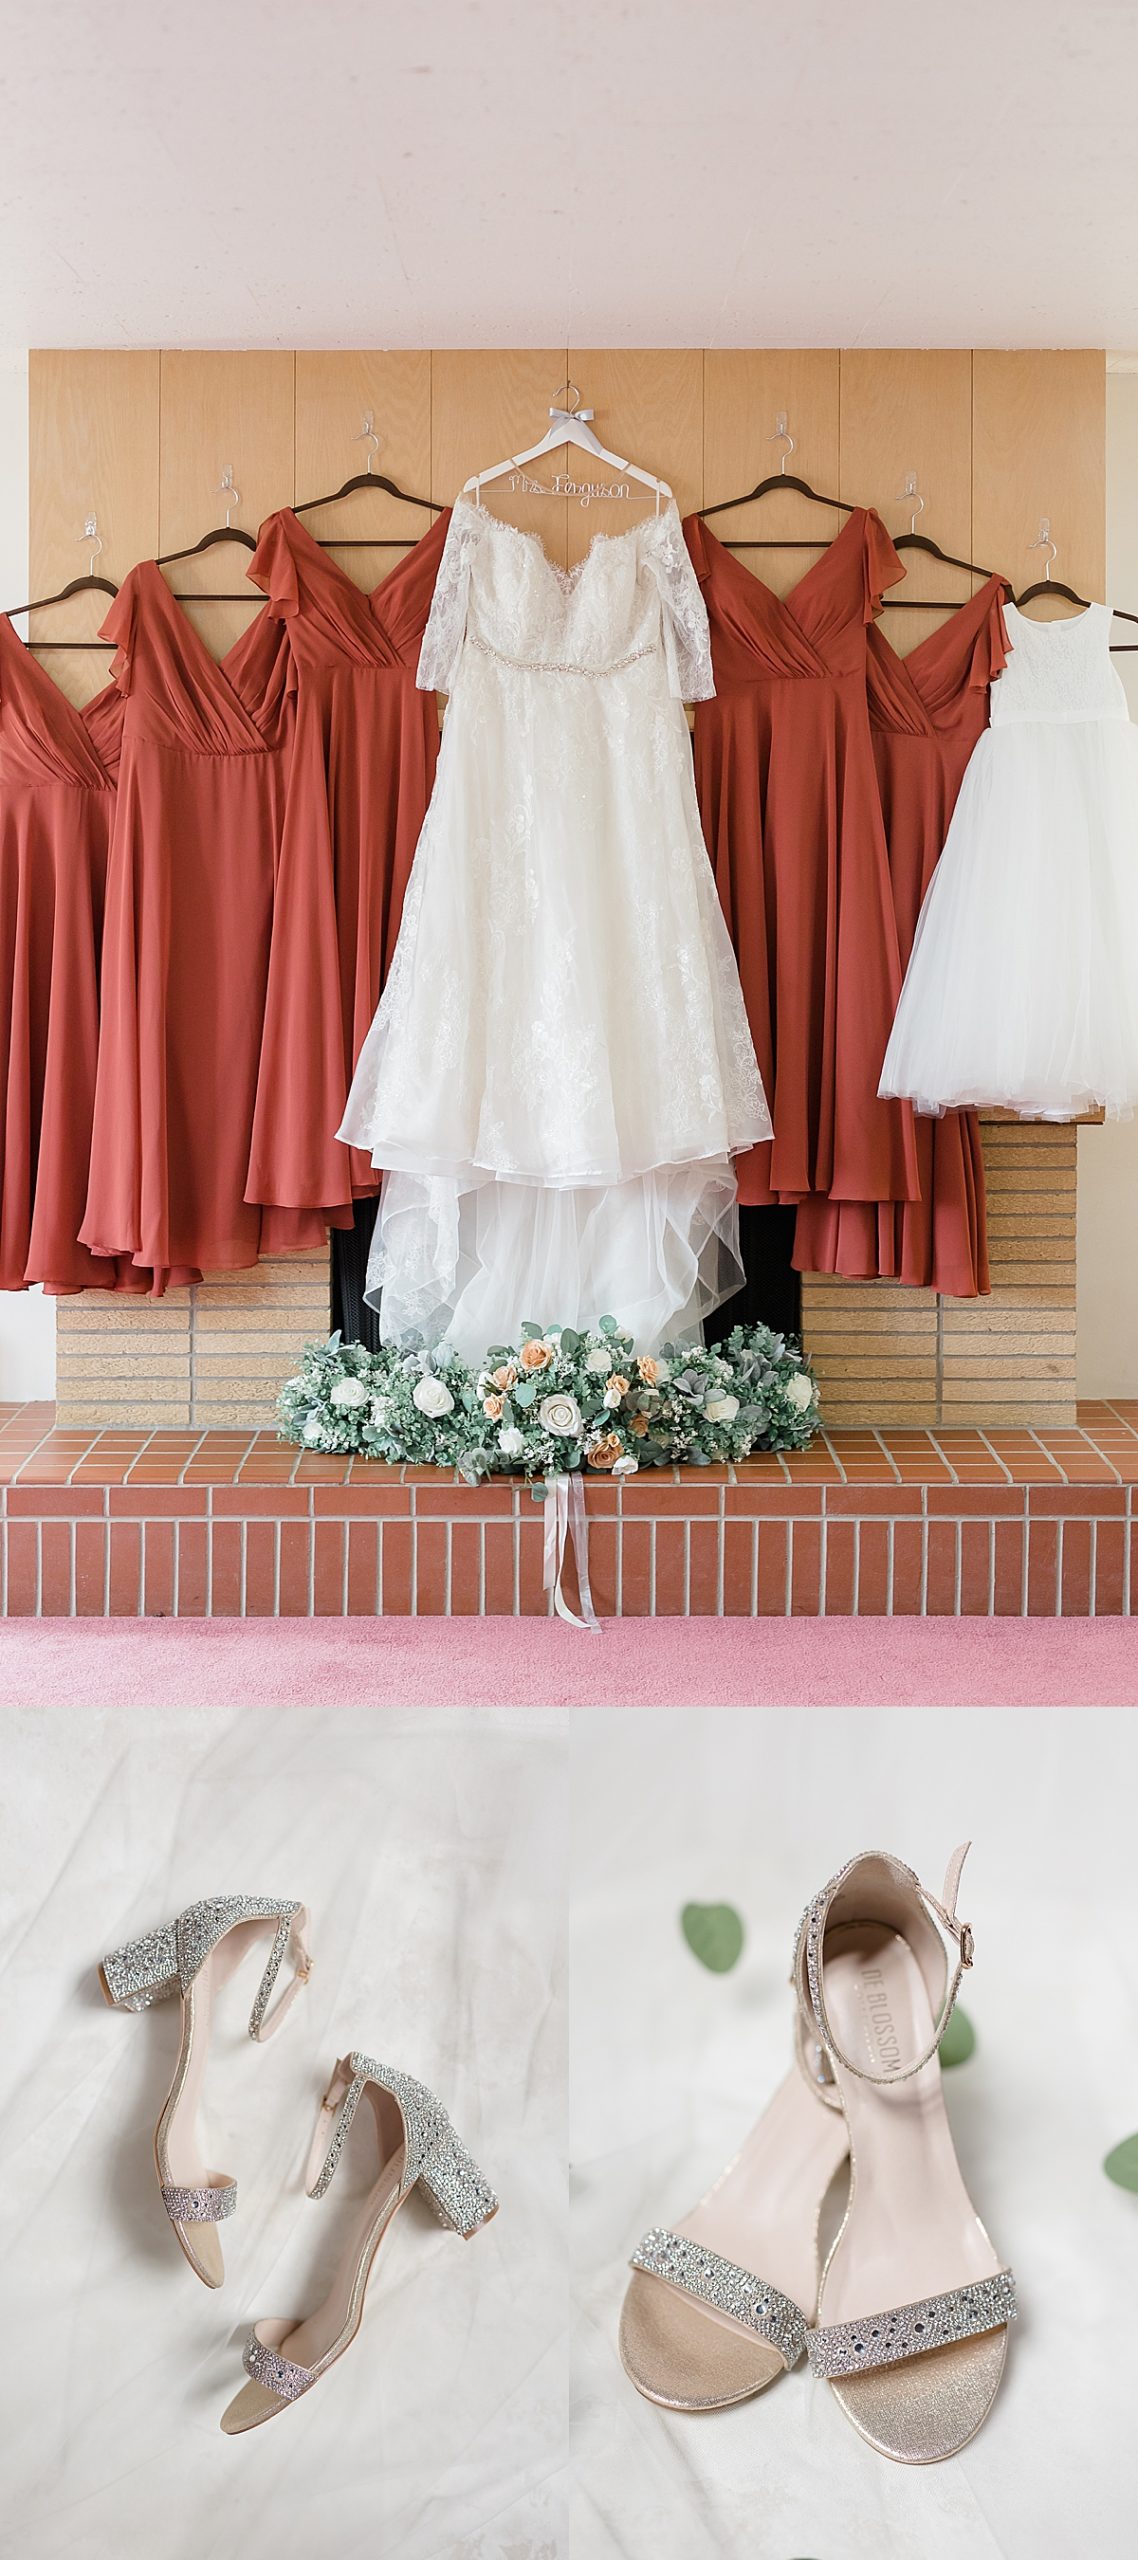 Hilton Garden Inn wedding day with dresses hung up on fireplace 